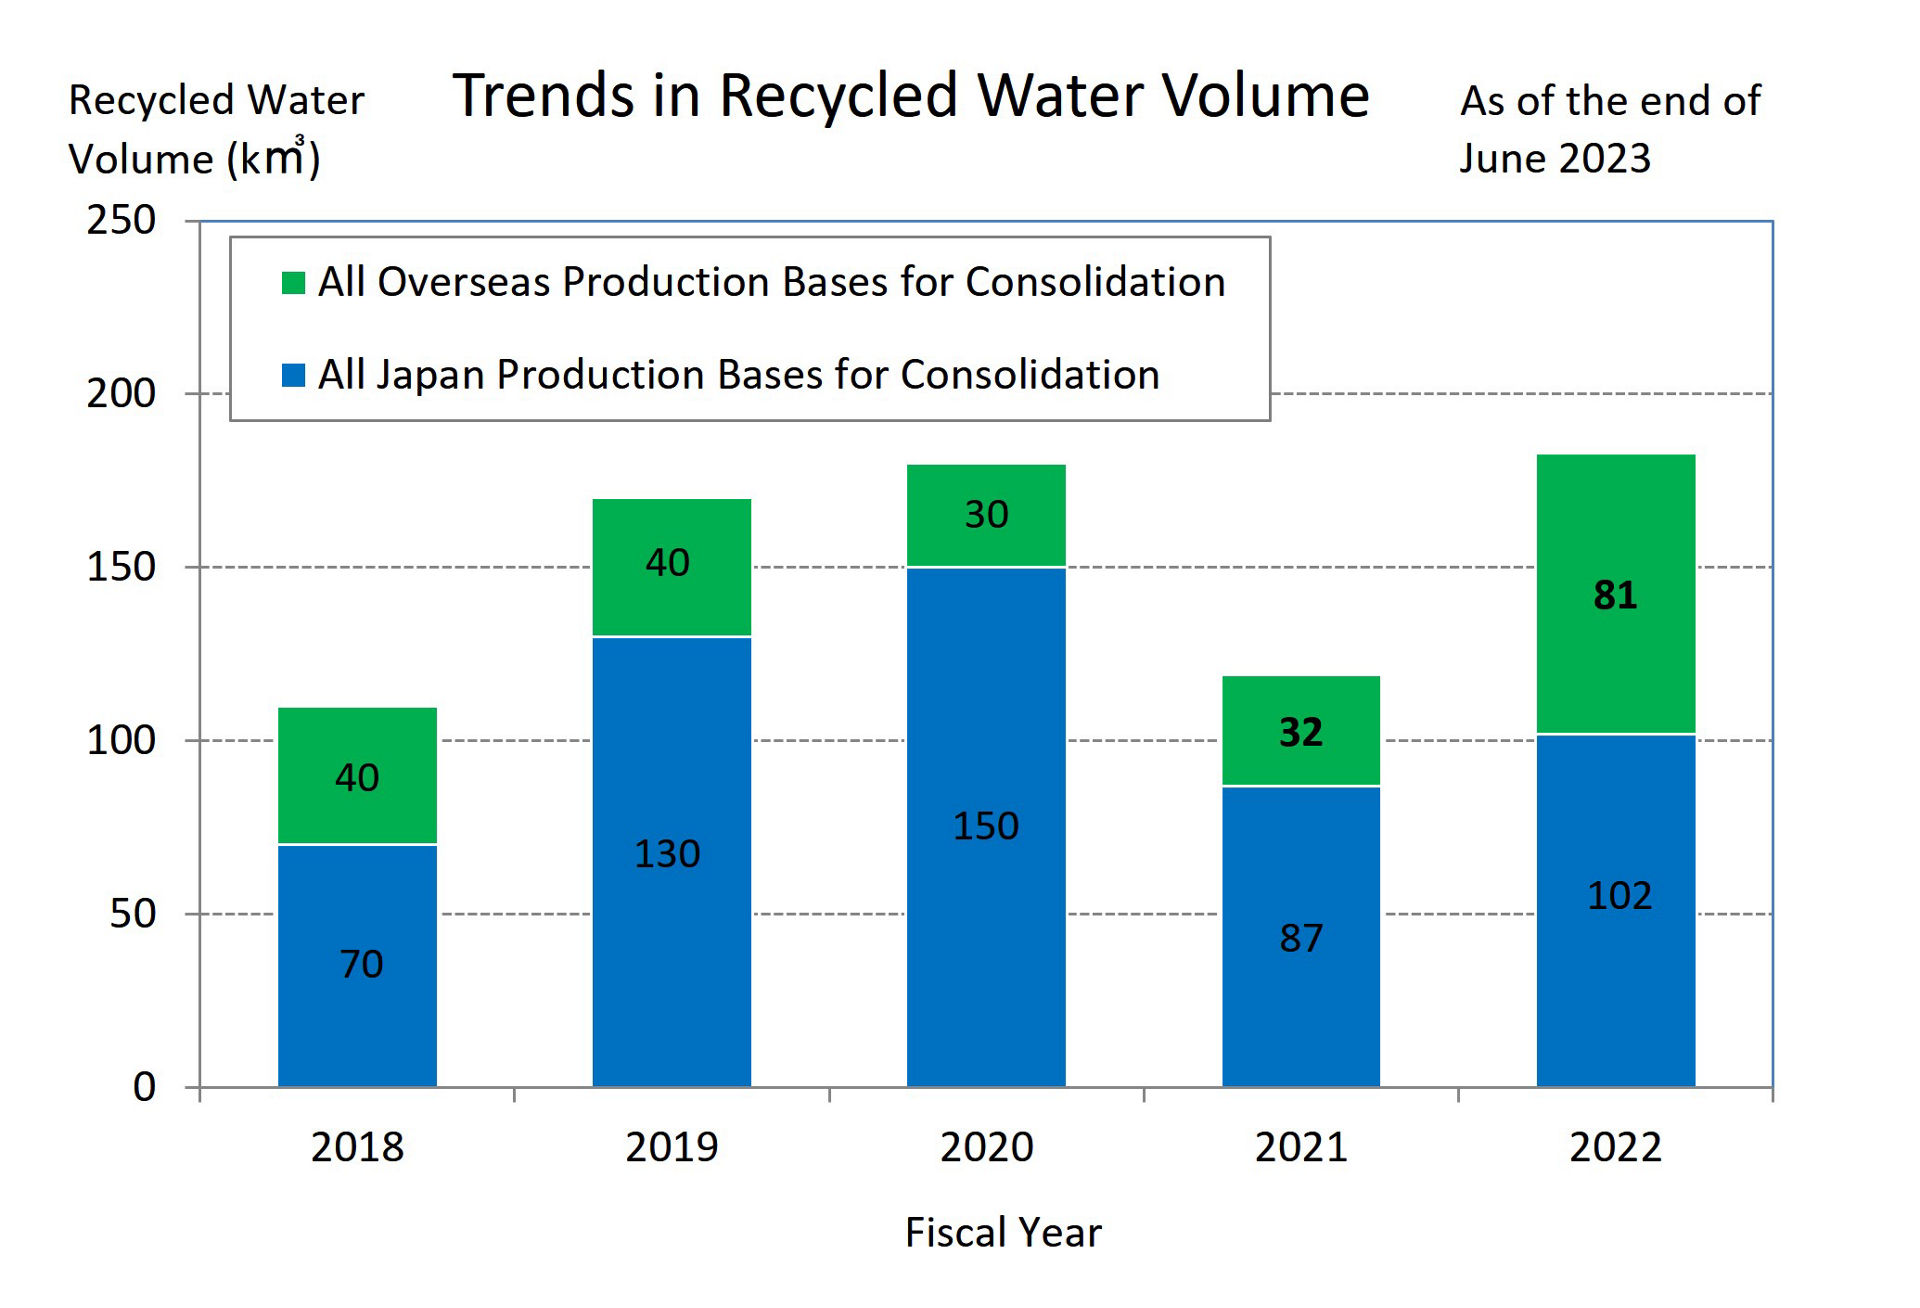 Trends in Recycled Water Volume